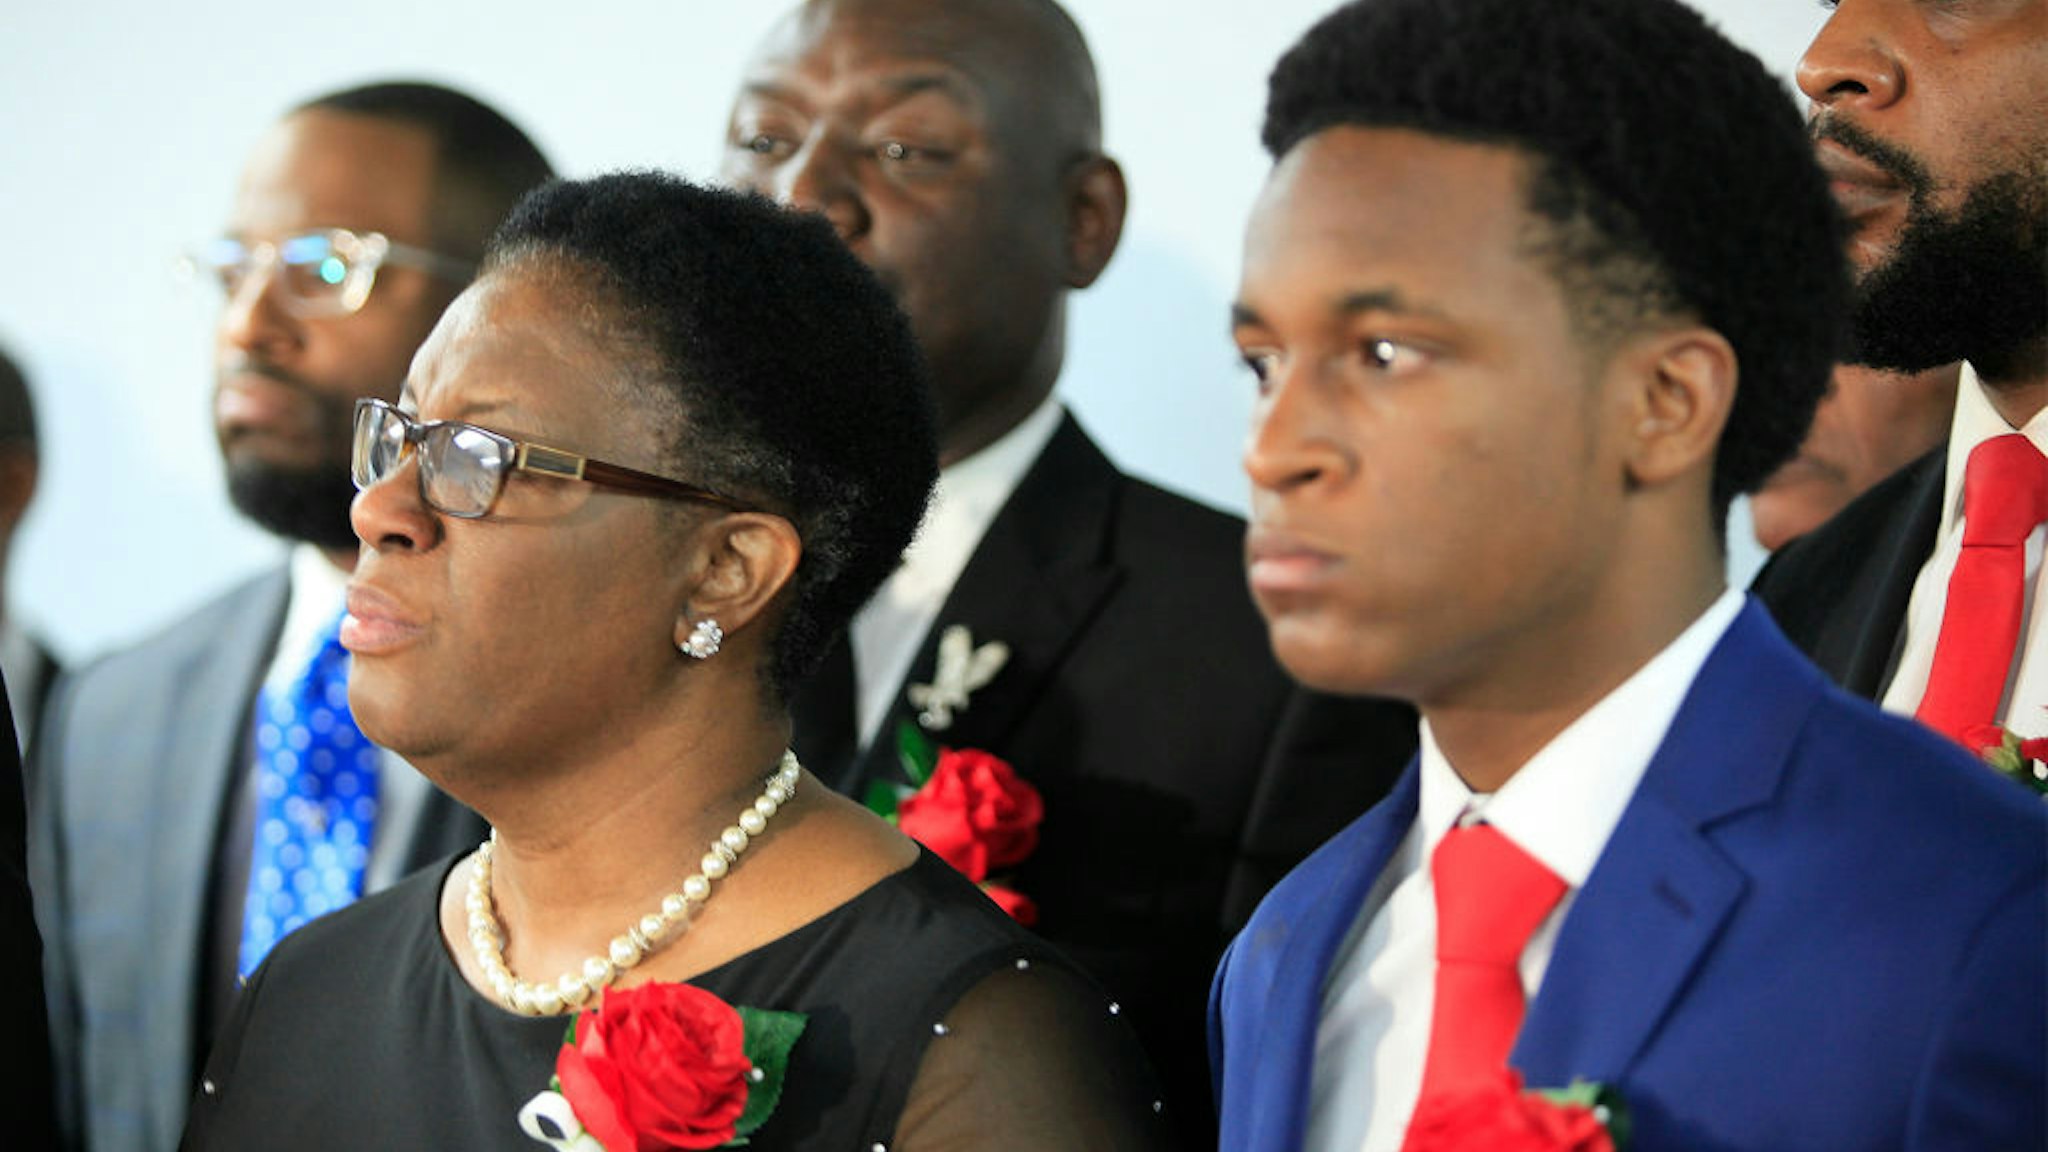 Allison Jean, mother of Botham Shem Jean, stands with family and church members of Greenville Avenue Church of Christ after the funeral service on September 13, 2018 in Richardson, Texas.